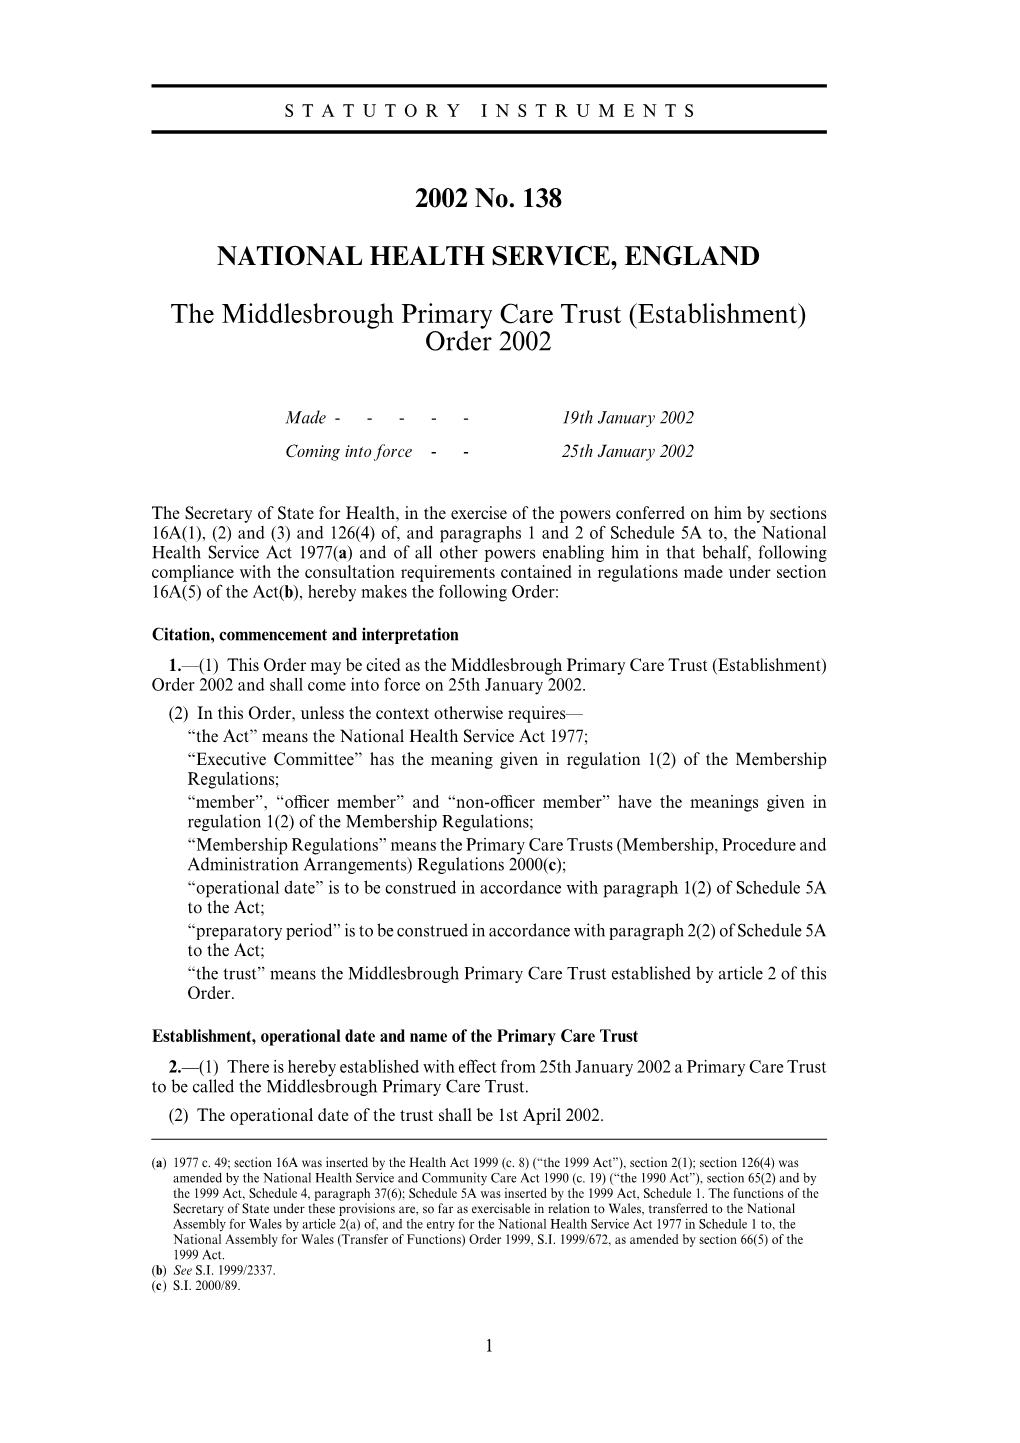 2002 No. 138 NATIONAL HEALTH SERVICE, ENGLAND the Middlesbrough Primary Care Trust